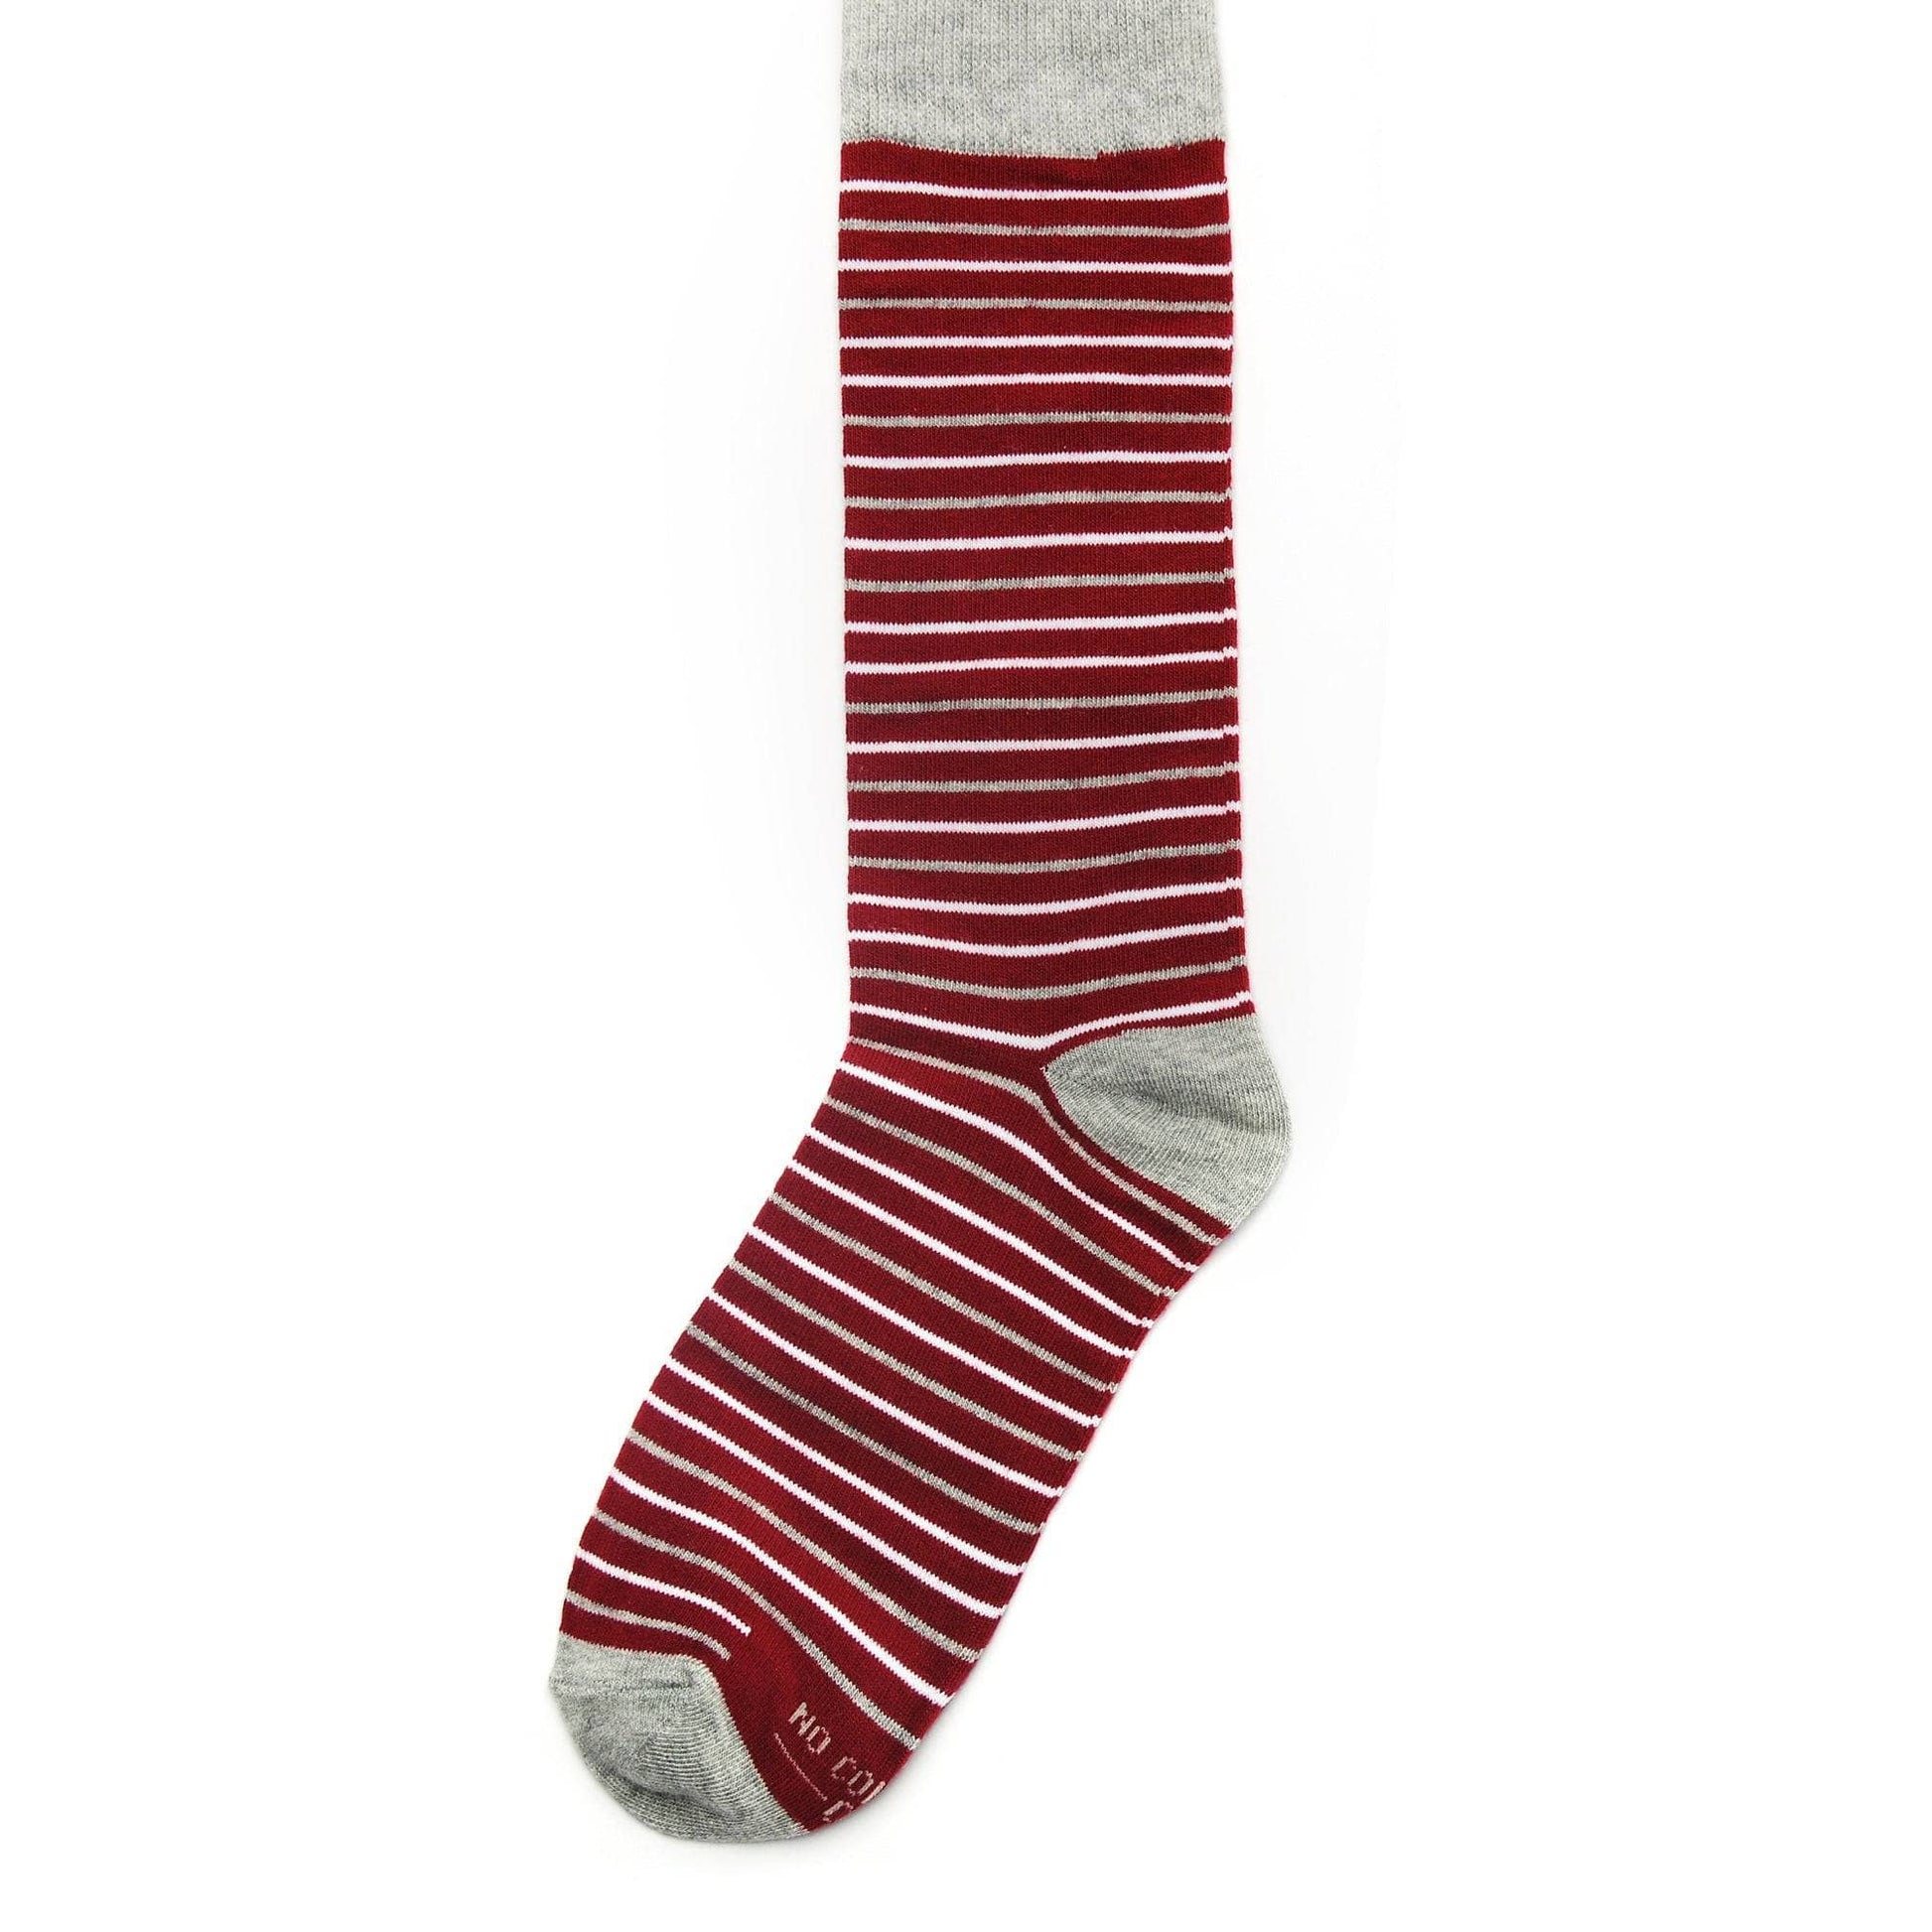 The No Cold Feet - Burgundy - Men's Gifts - Manly Bands